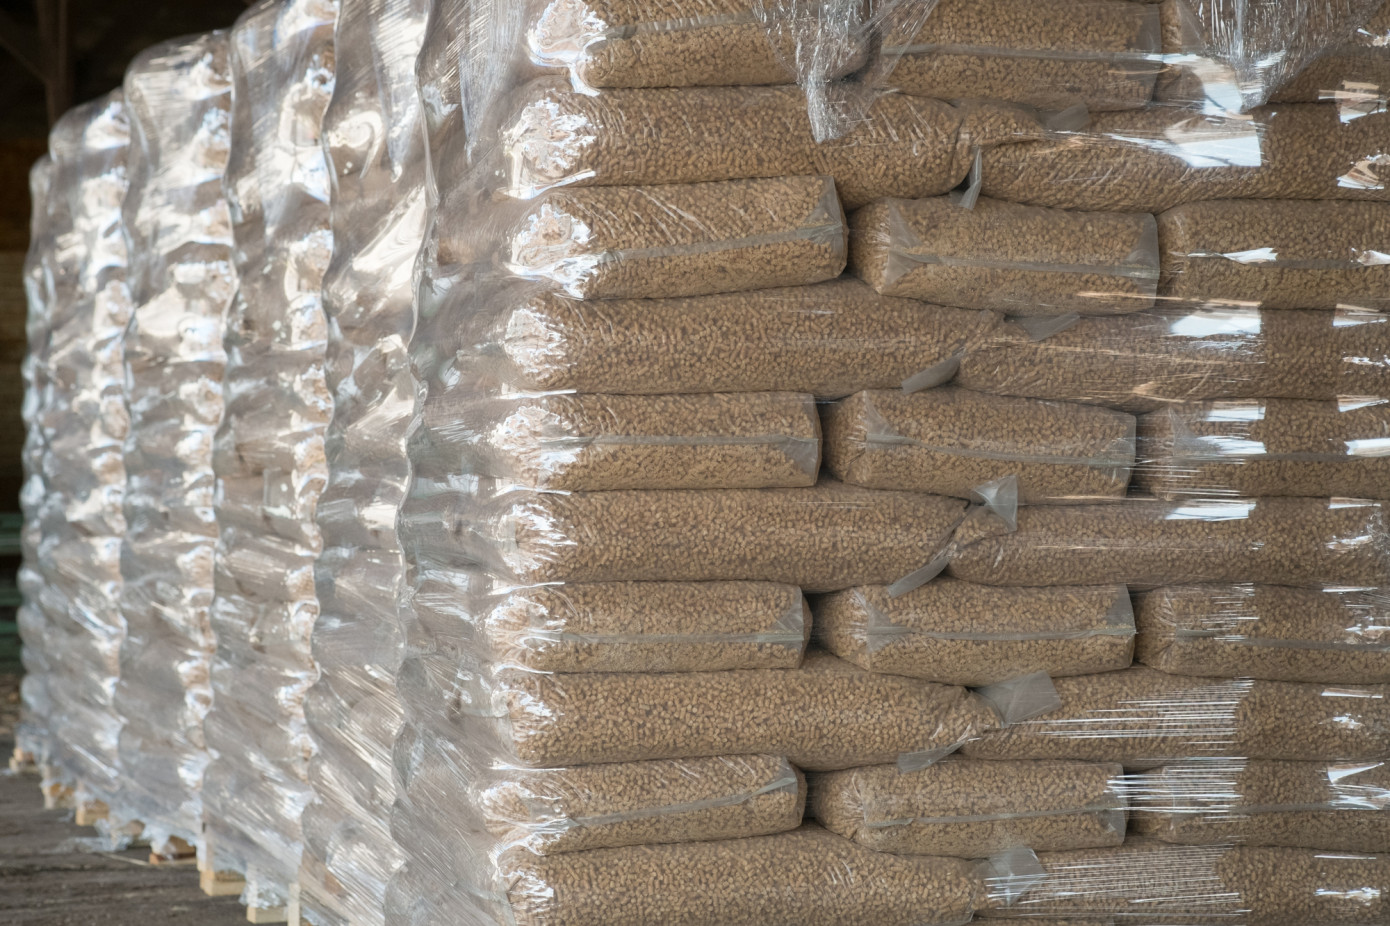 Imports of wood pellets to Japan surge 97% in February